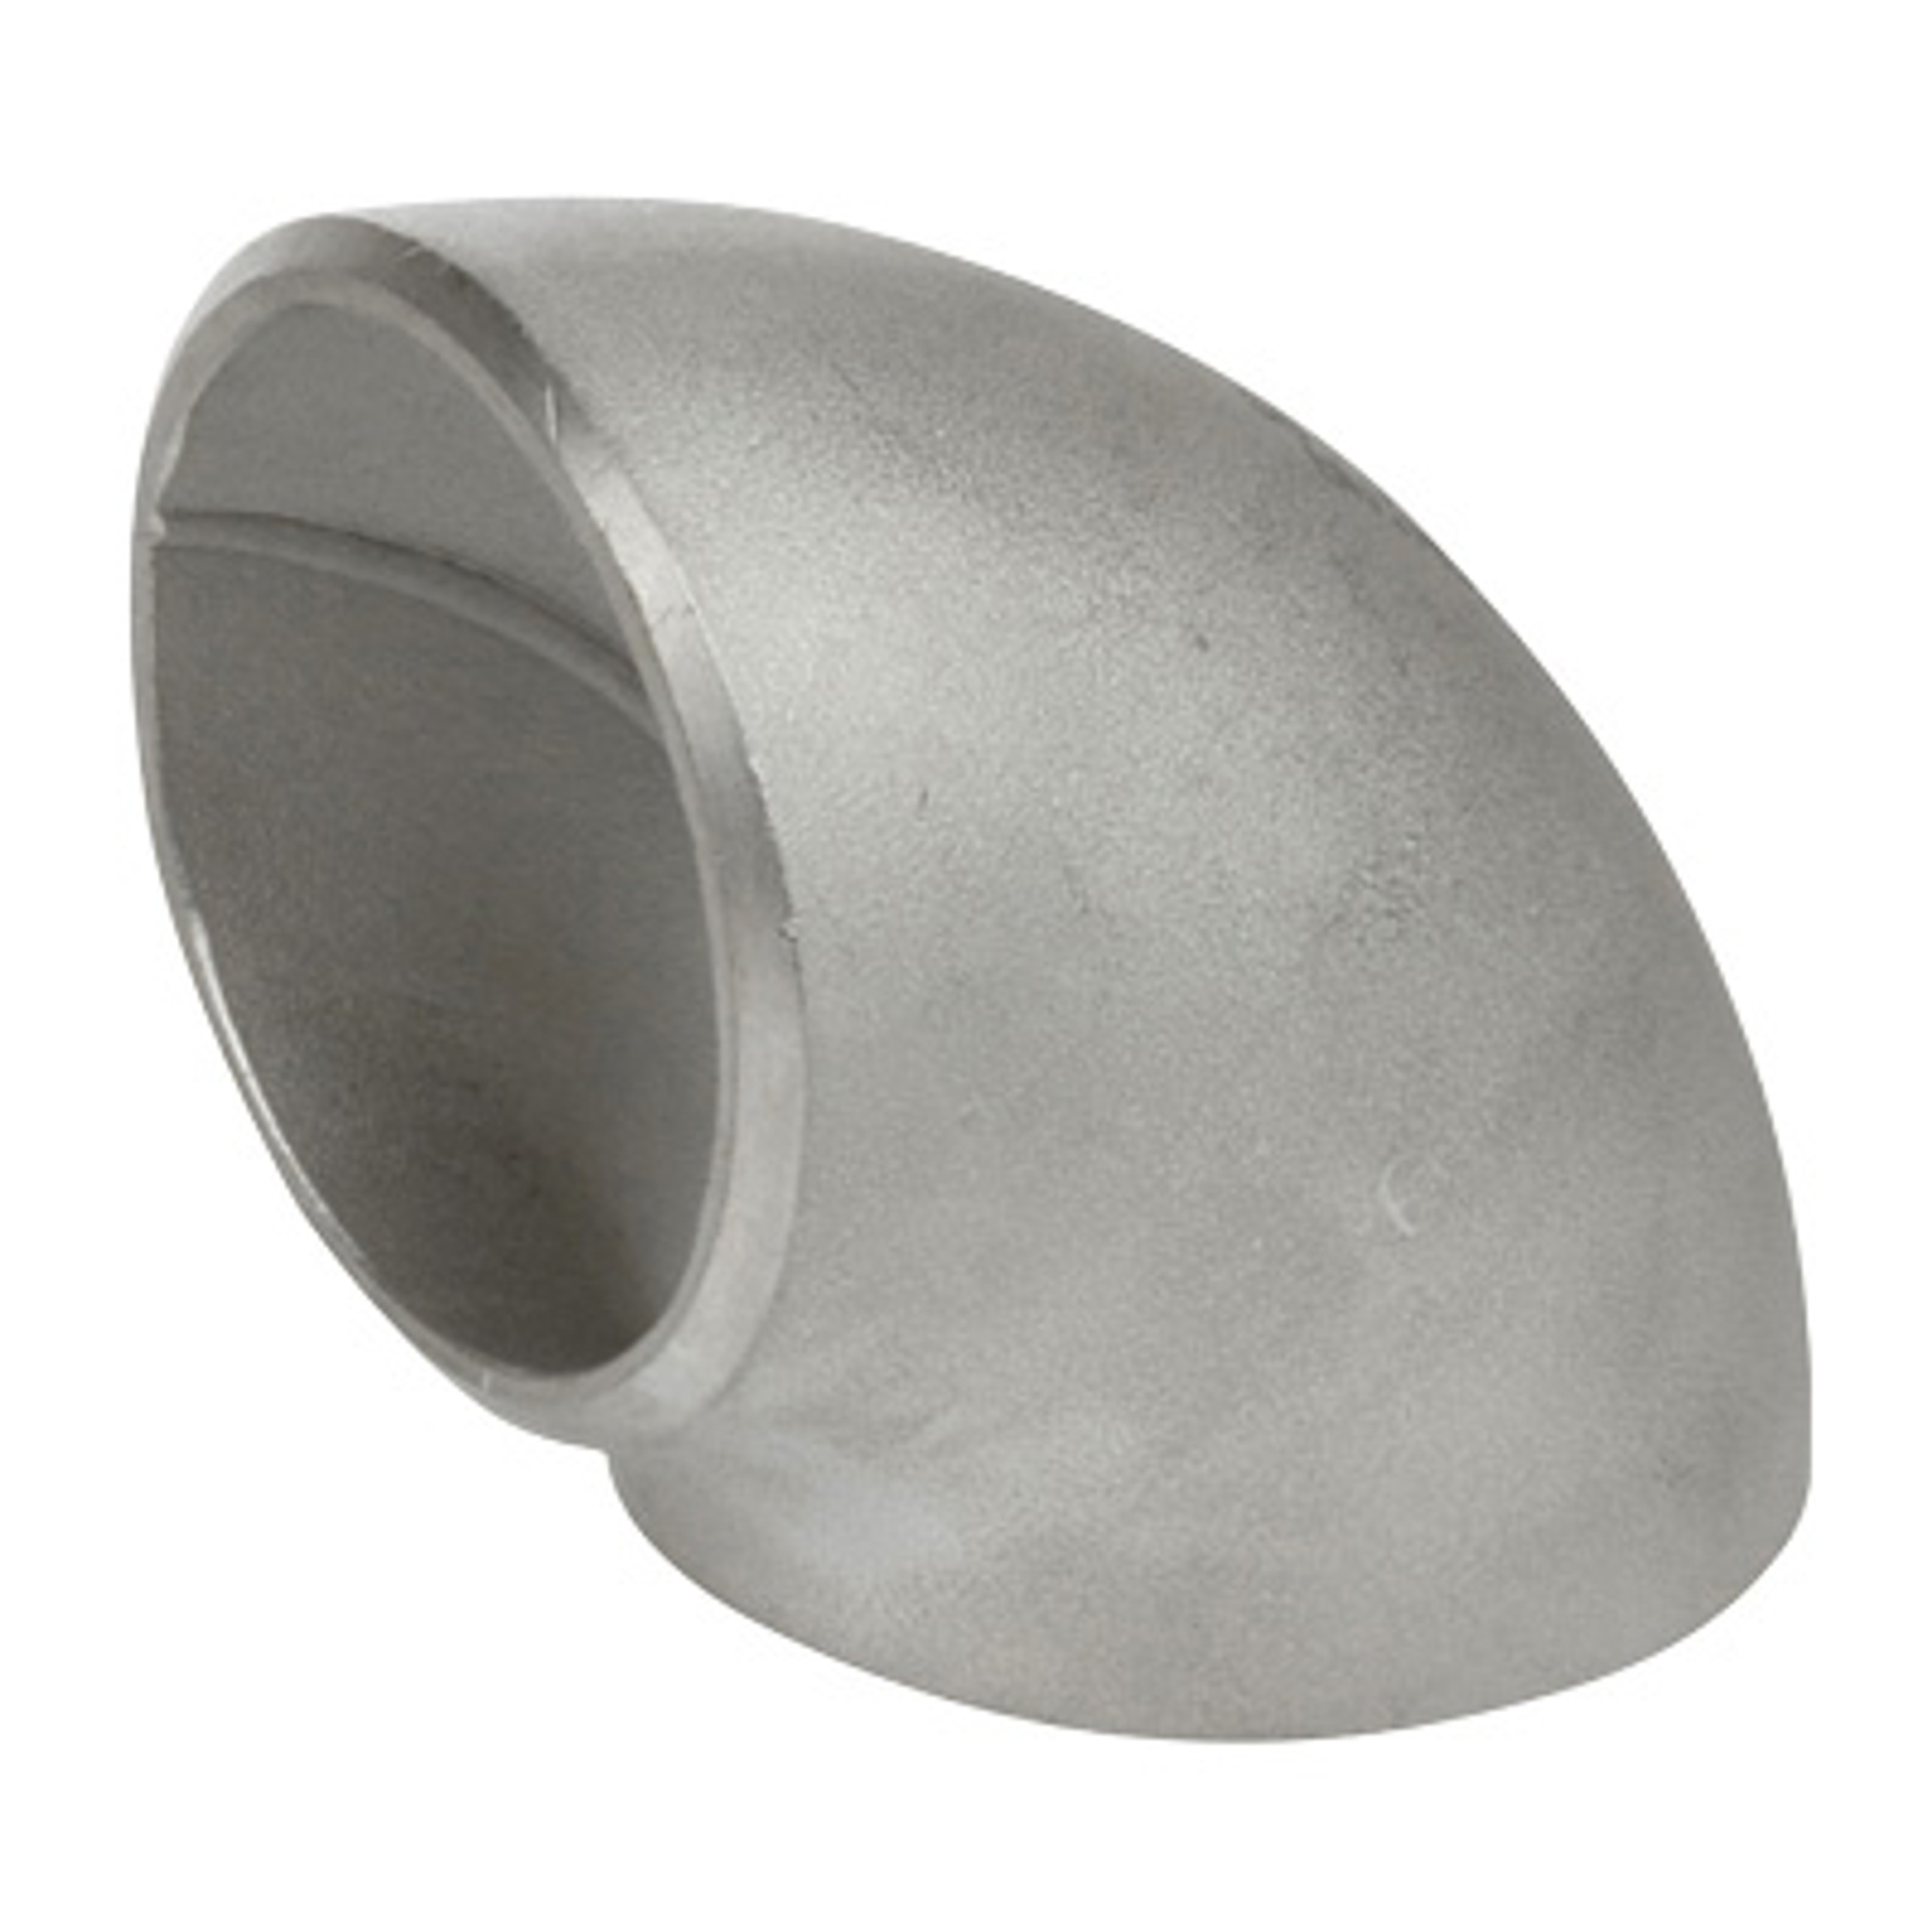 Stainless Steel Butt Weld Pipe Fittings - 90° Elbow (LR) - 4" SCH 40